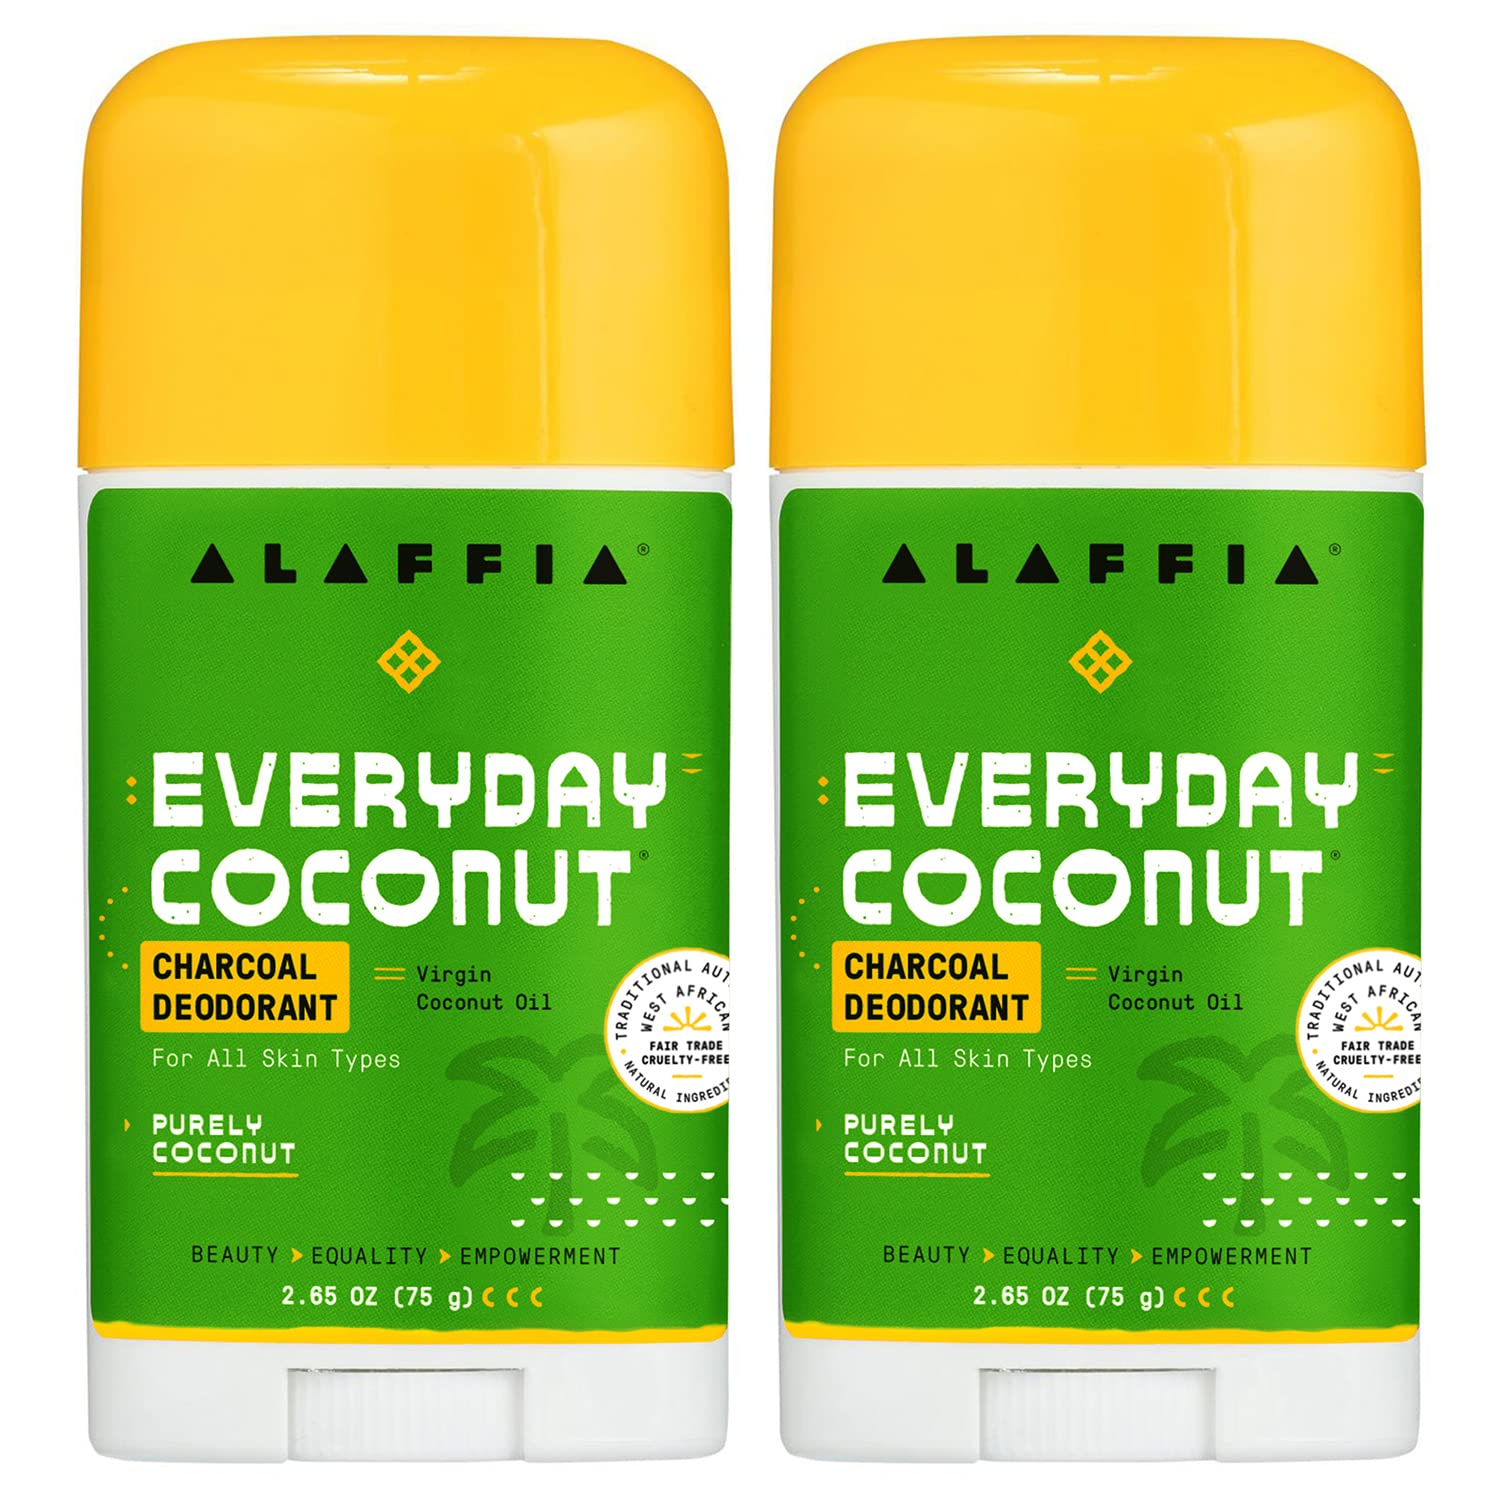 Alaffia Coconut Charcoal Natural Deodorant, Activated Charcoal, Odor Protection Soothing Butter & Aloe Vera, No Aluminum, Sulfates, or Parabens, Purely Coconut, 2 Pack - 2.65 Oz Ea Coconut 2.65 Ounce (Pac…